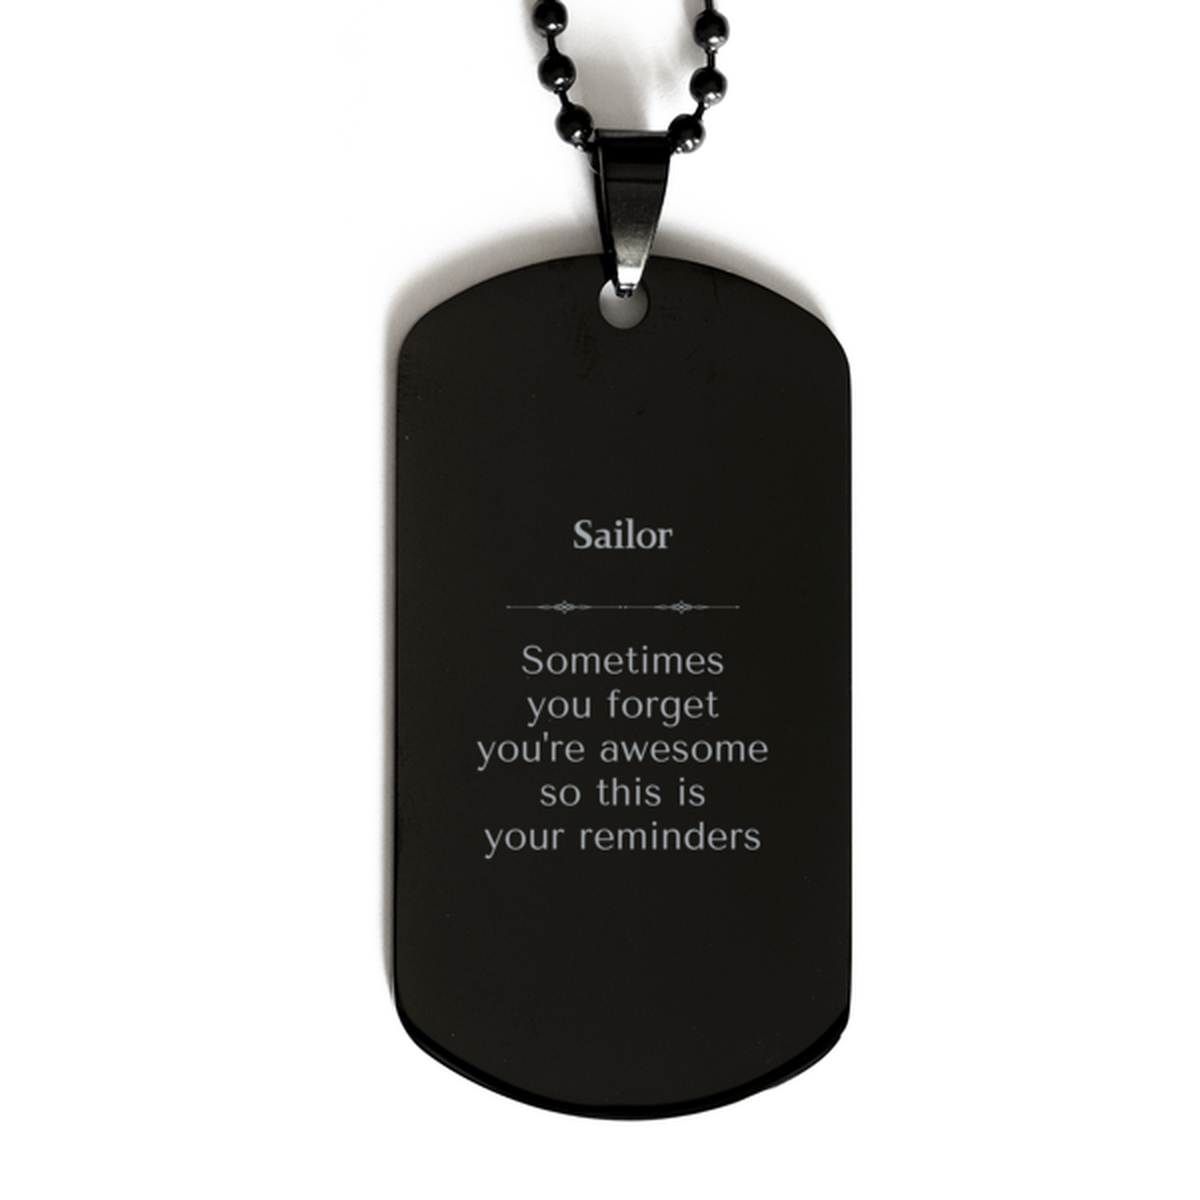 Sentimental Sailor Black Dog Tag, Sailor Sometimes you forget you're awesome so this is your reminders, Graduation Christmas Birthday Gifts for Sailor, Men, Women, Coworkers